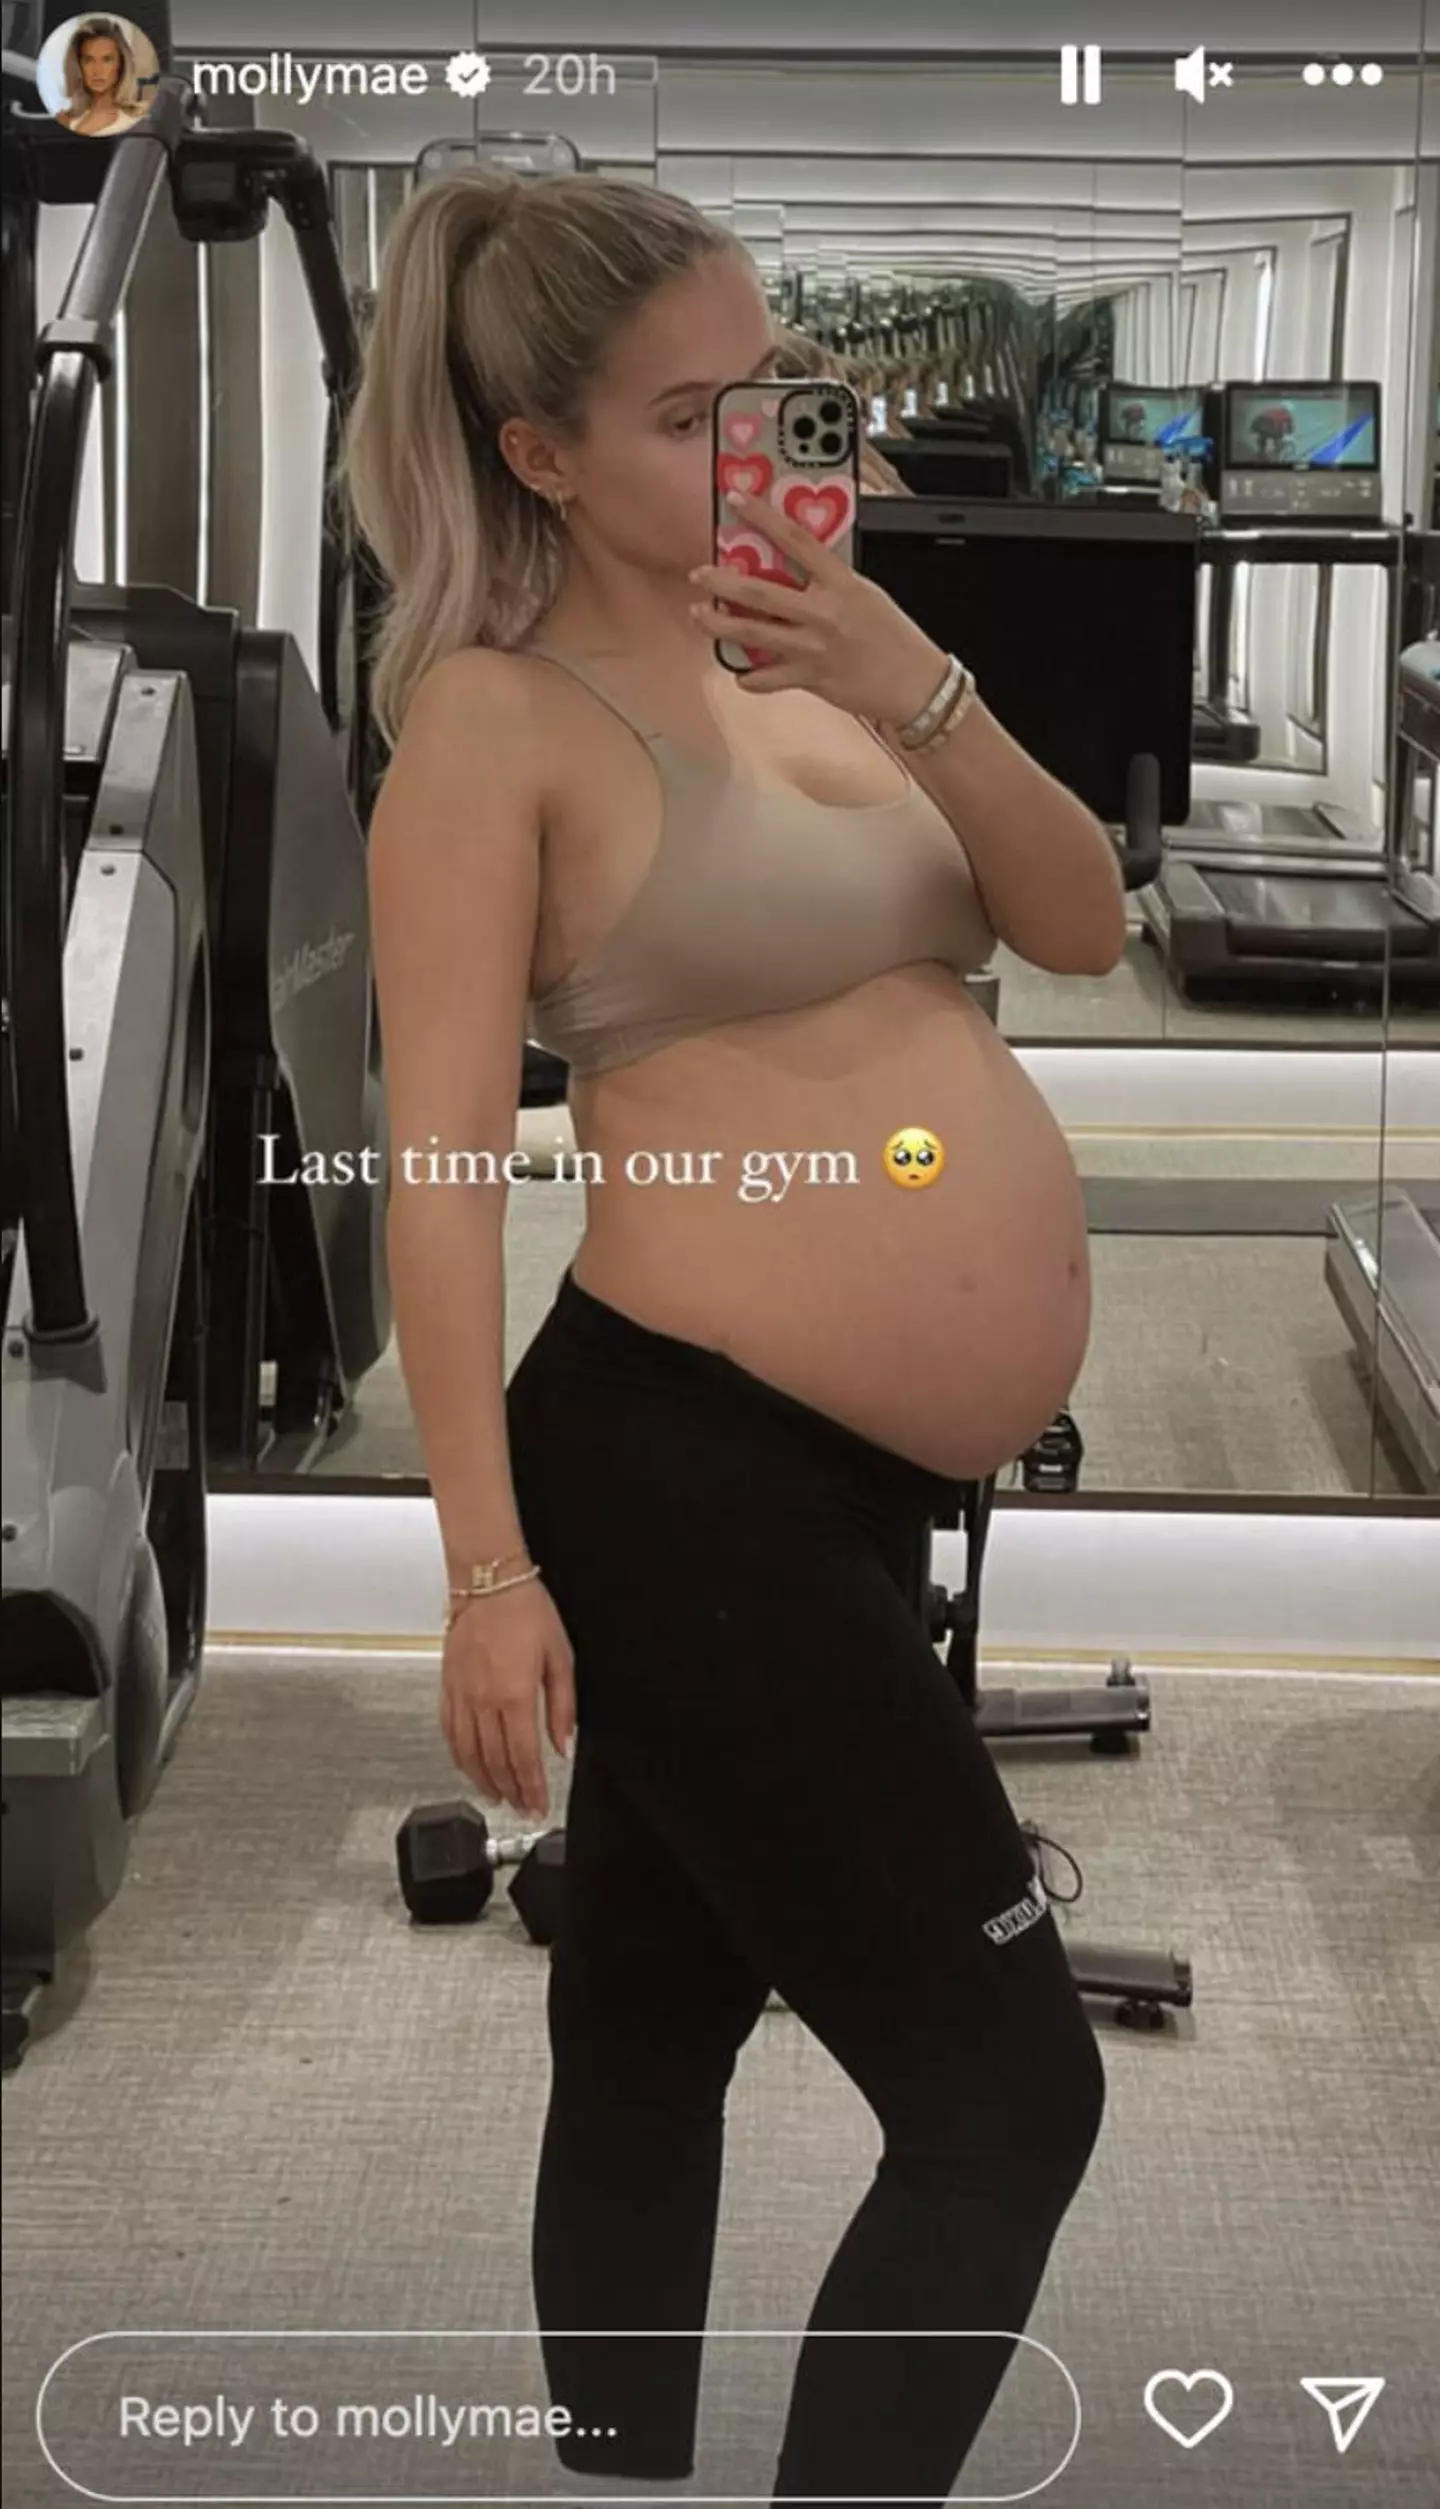 She also shared a picture of her last gym session before giving birth.